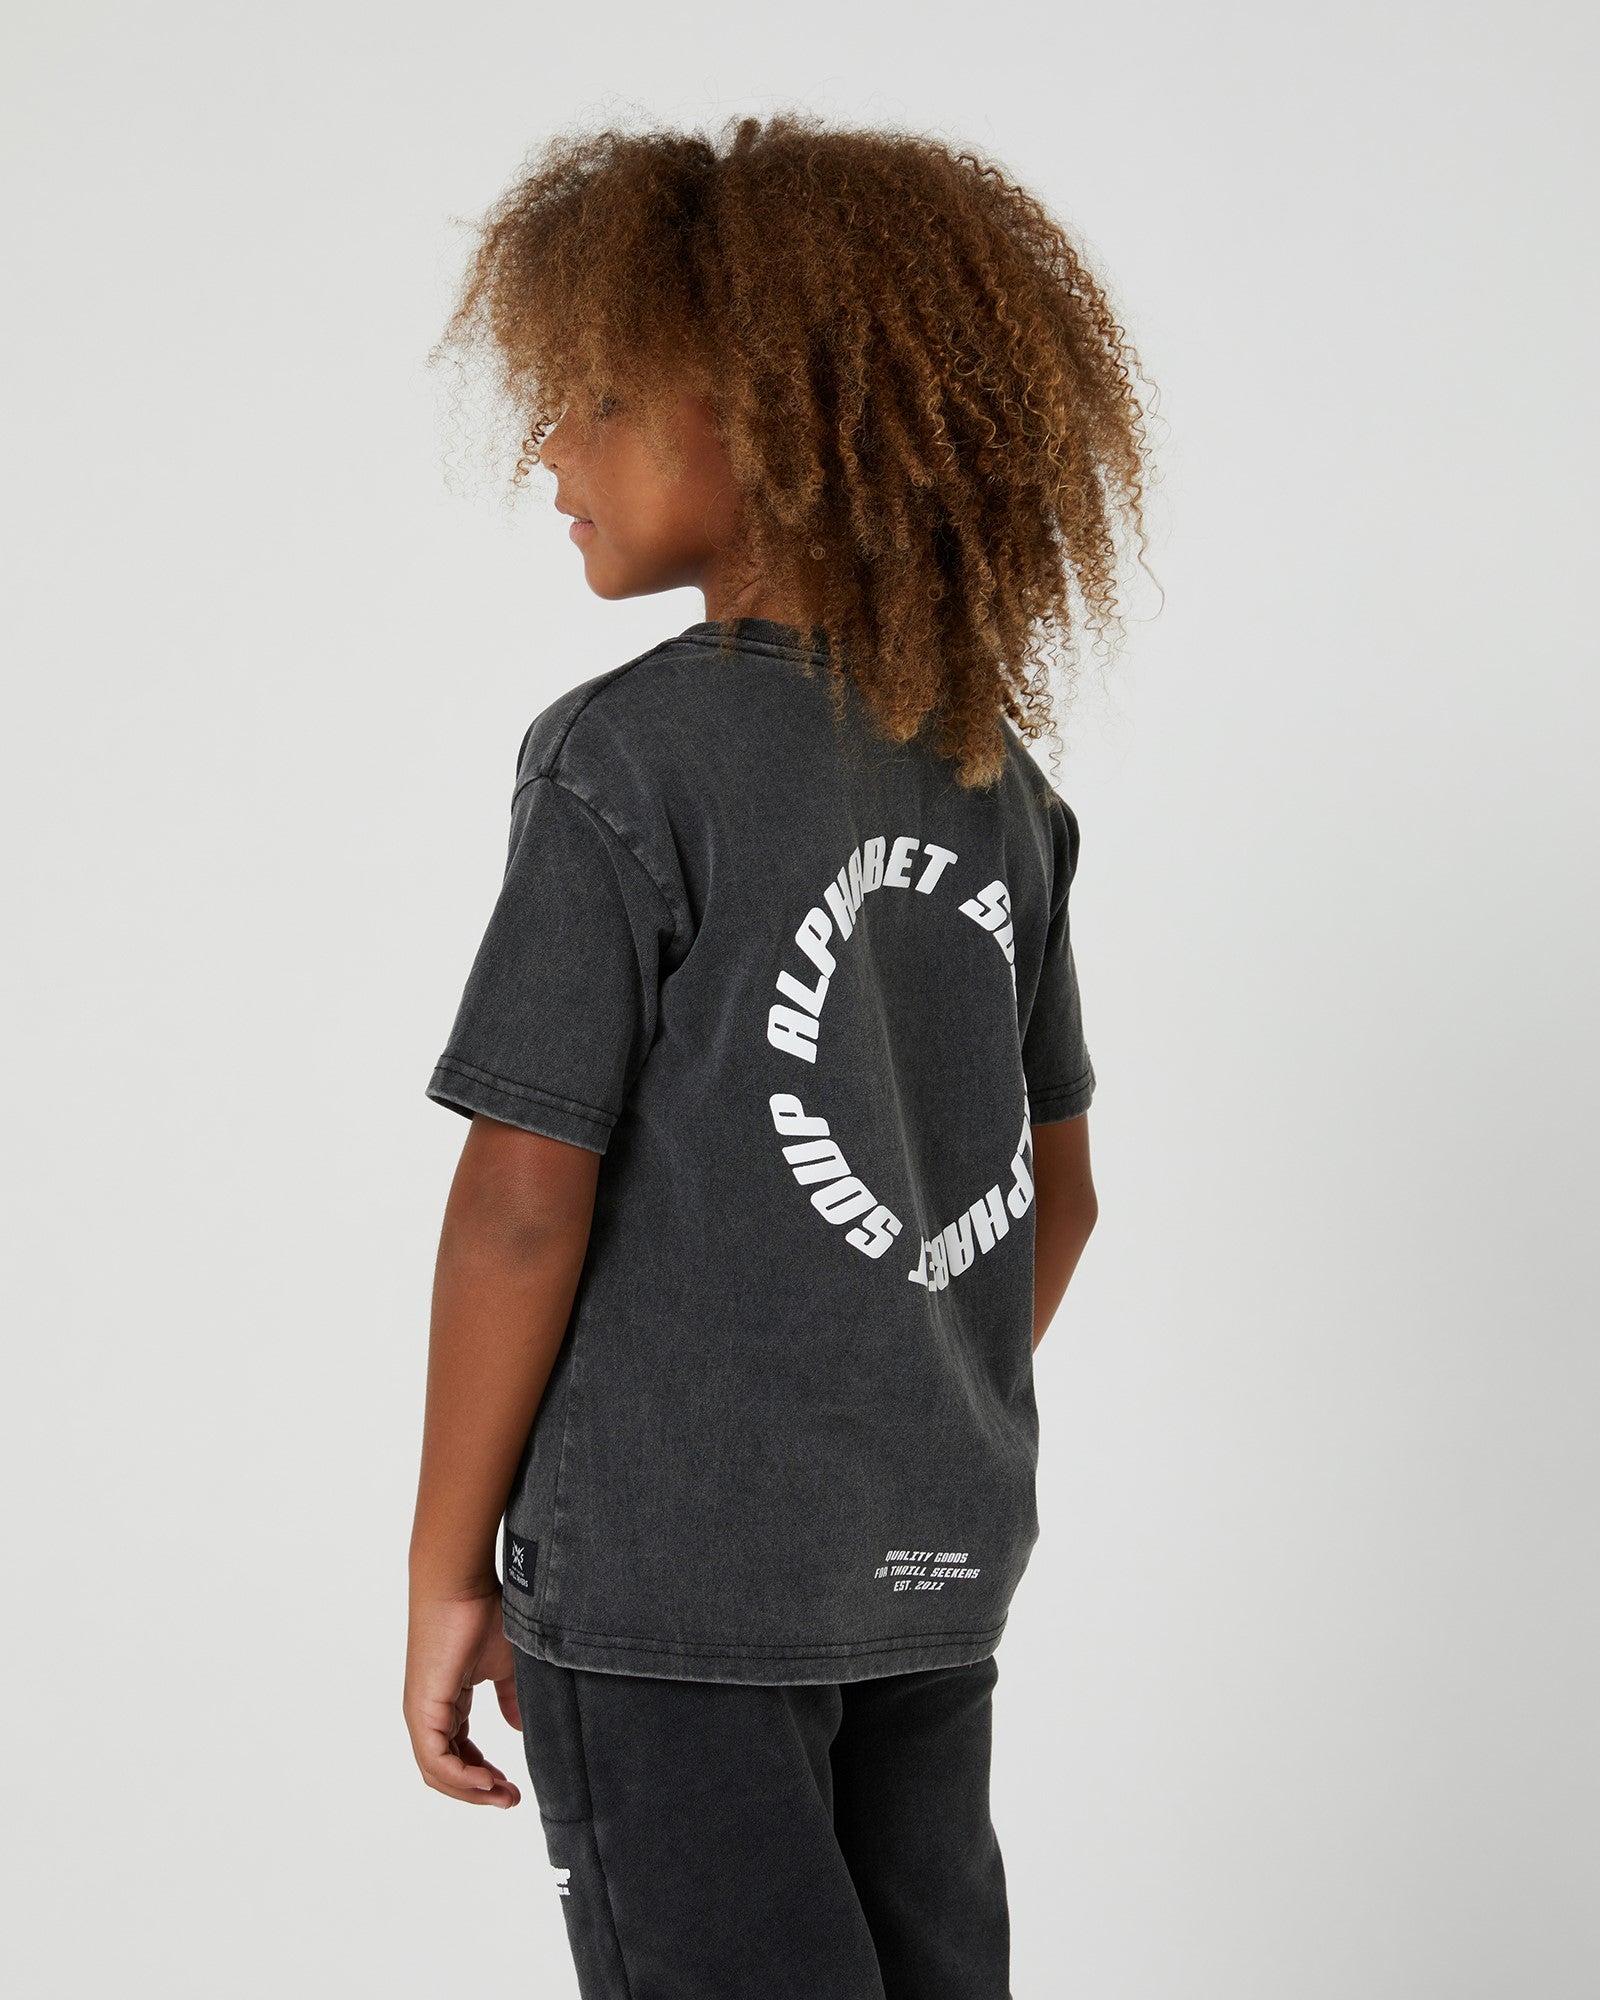 Kids San Clemente Tee from Alphabet Soup. 100% cotton with vintage dye wash. Puff logo print. Straight hemline, short sleeves. Comfortable and casual.